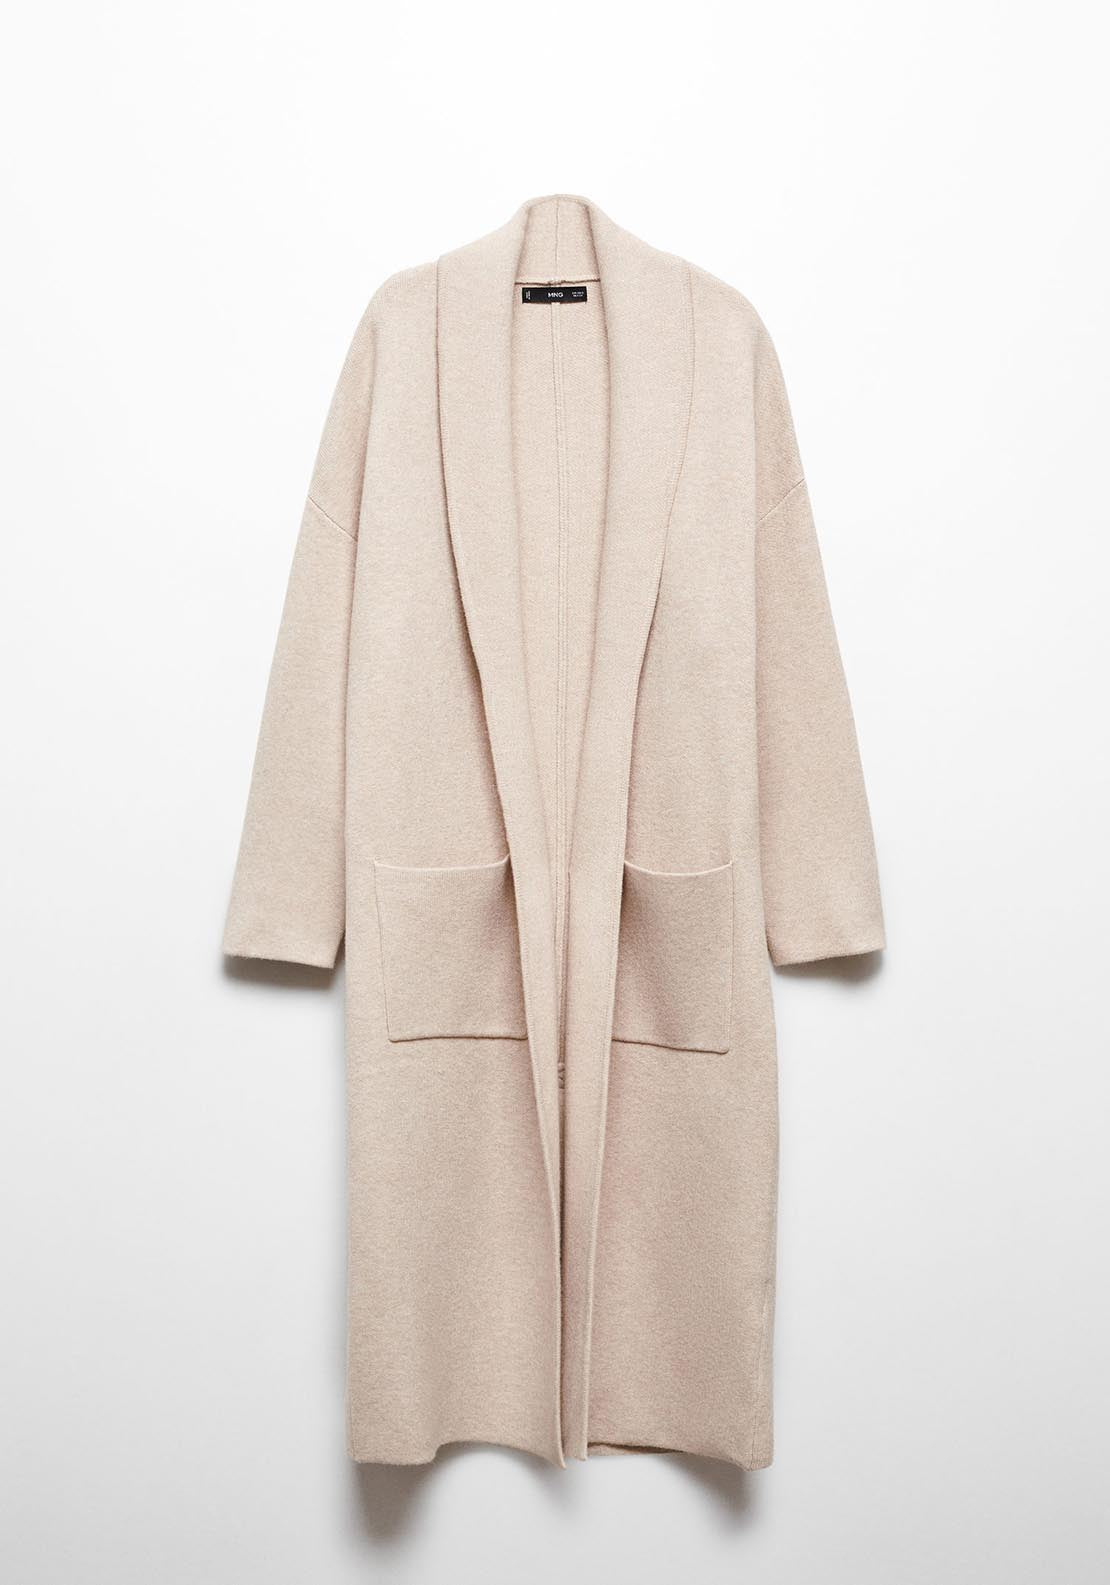 Mango Oversized knitted coat with pockets - Light 6 Shaws Department Stores